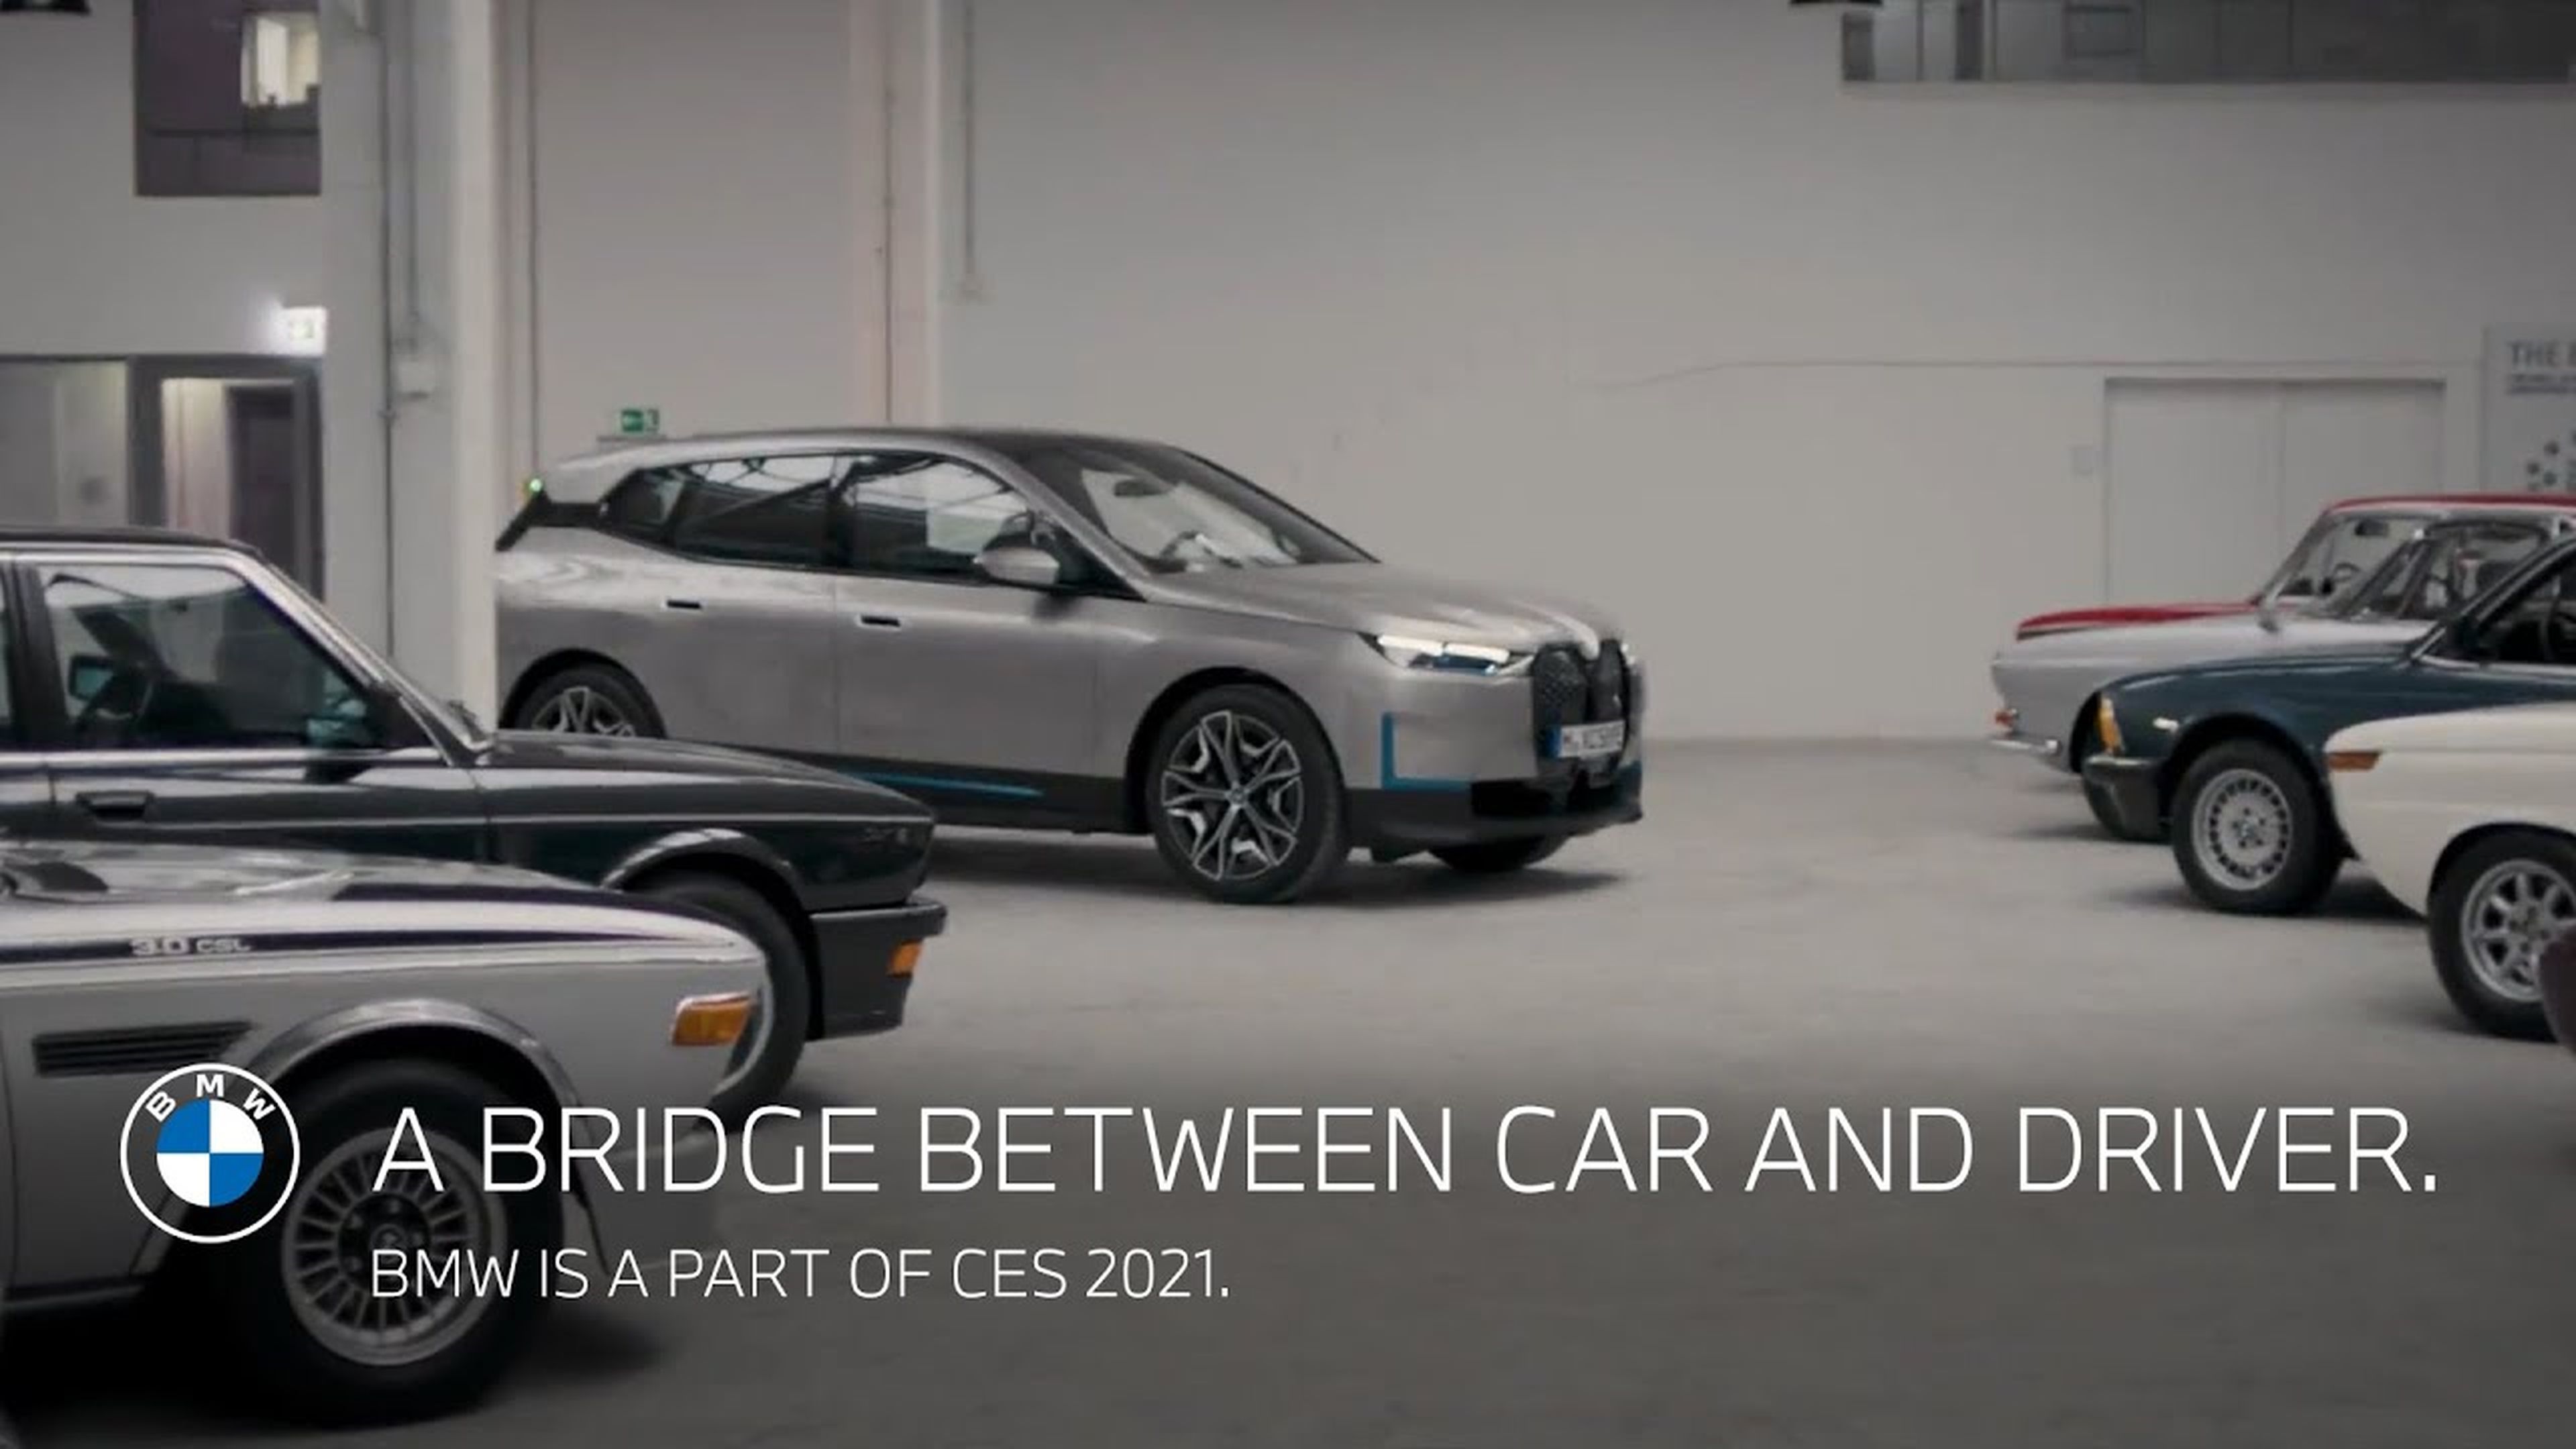 A bridge between car and driver. BMW is a part of CES 2021.